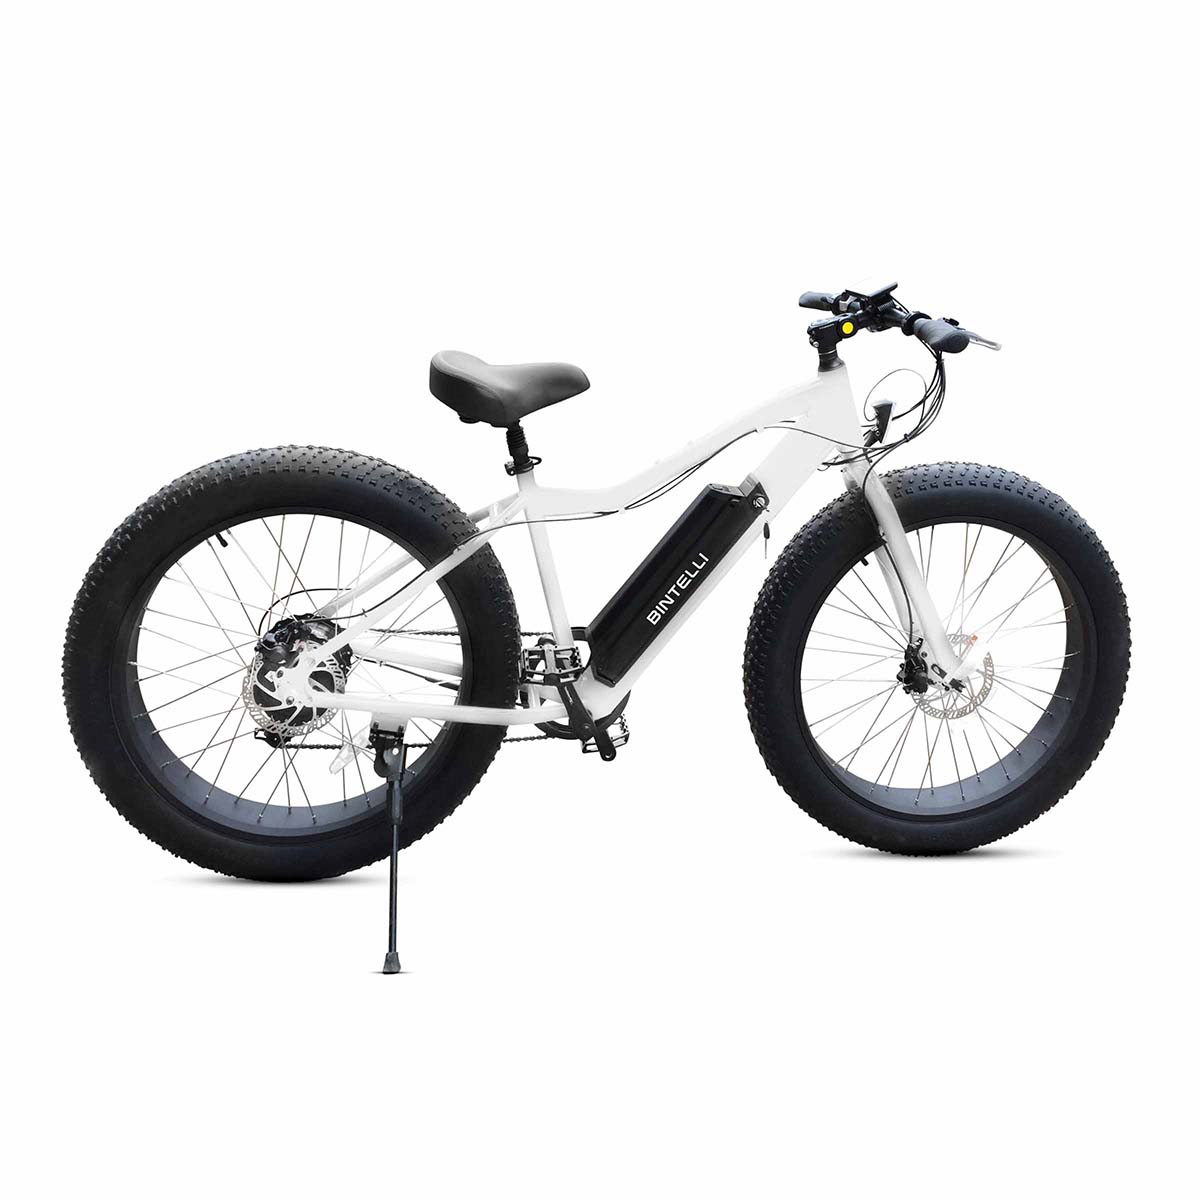 Bintelli M1 Electric Bicycle in Color White With Fat Tire